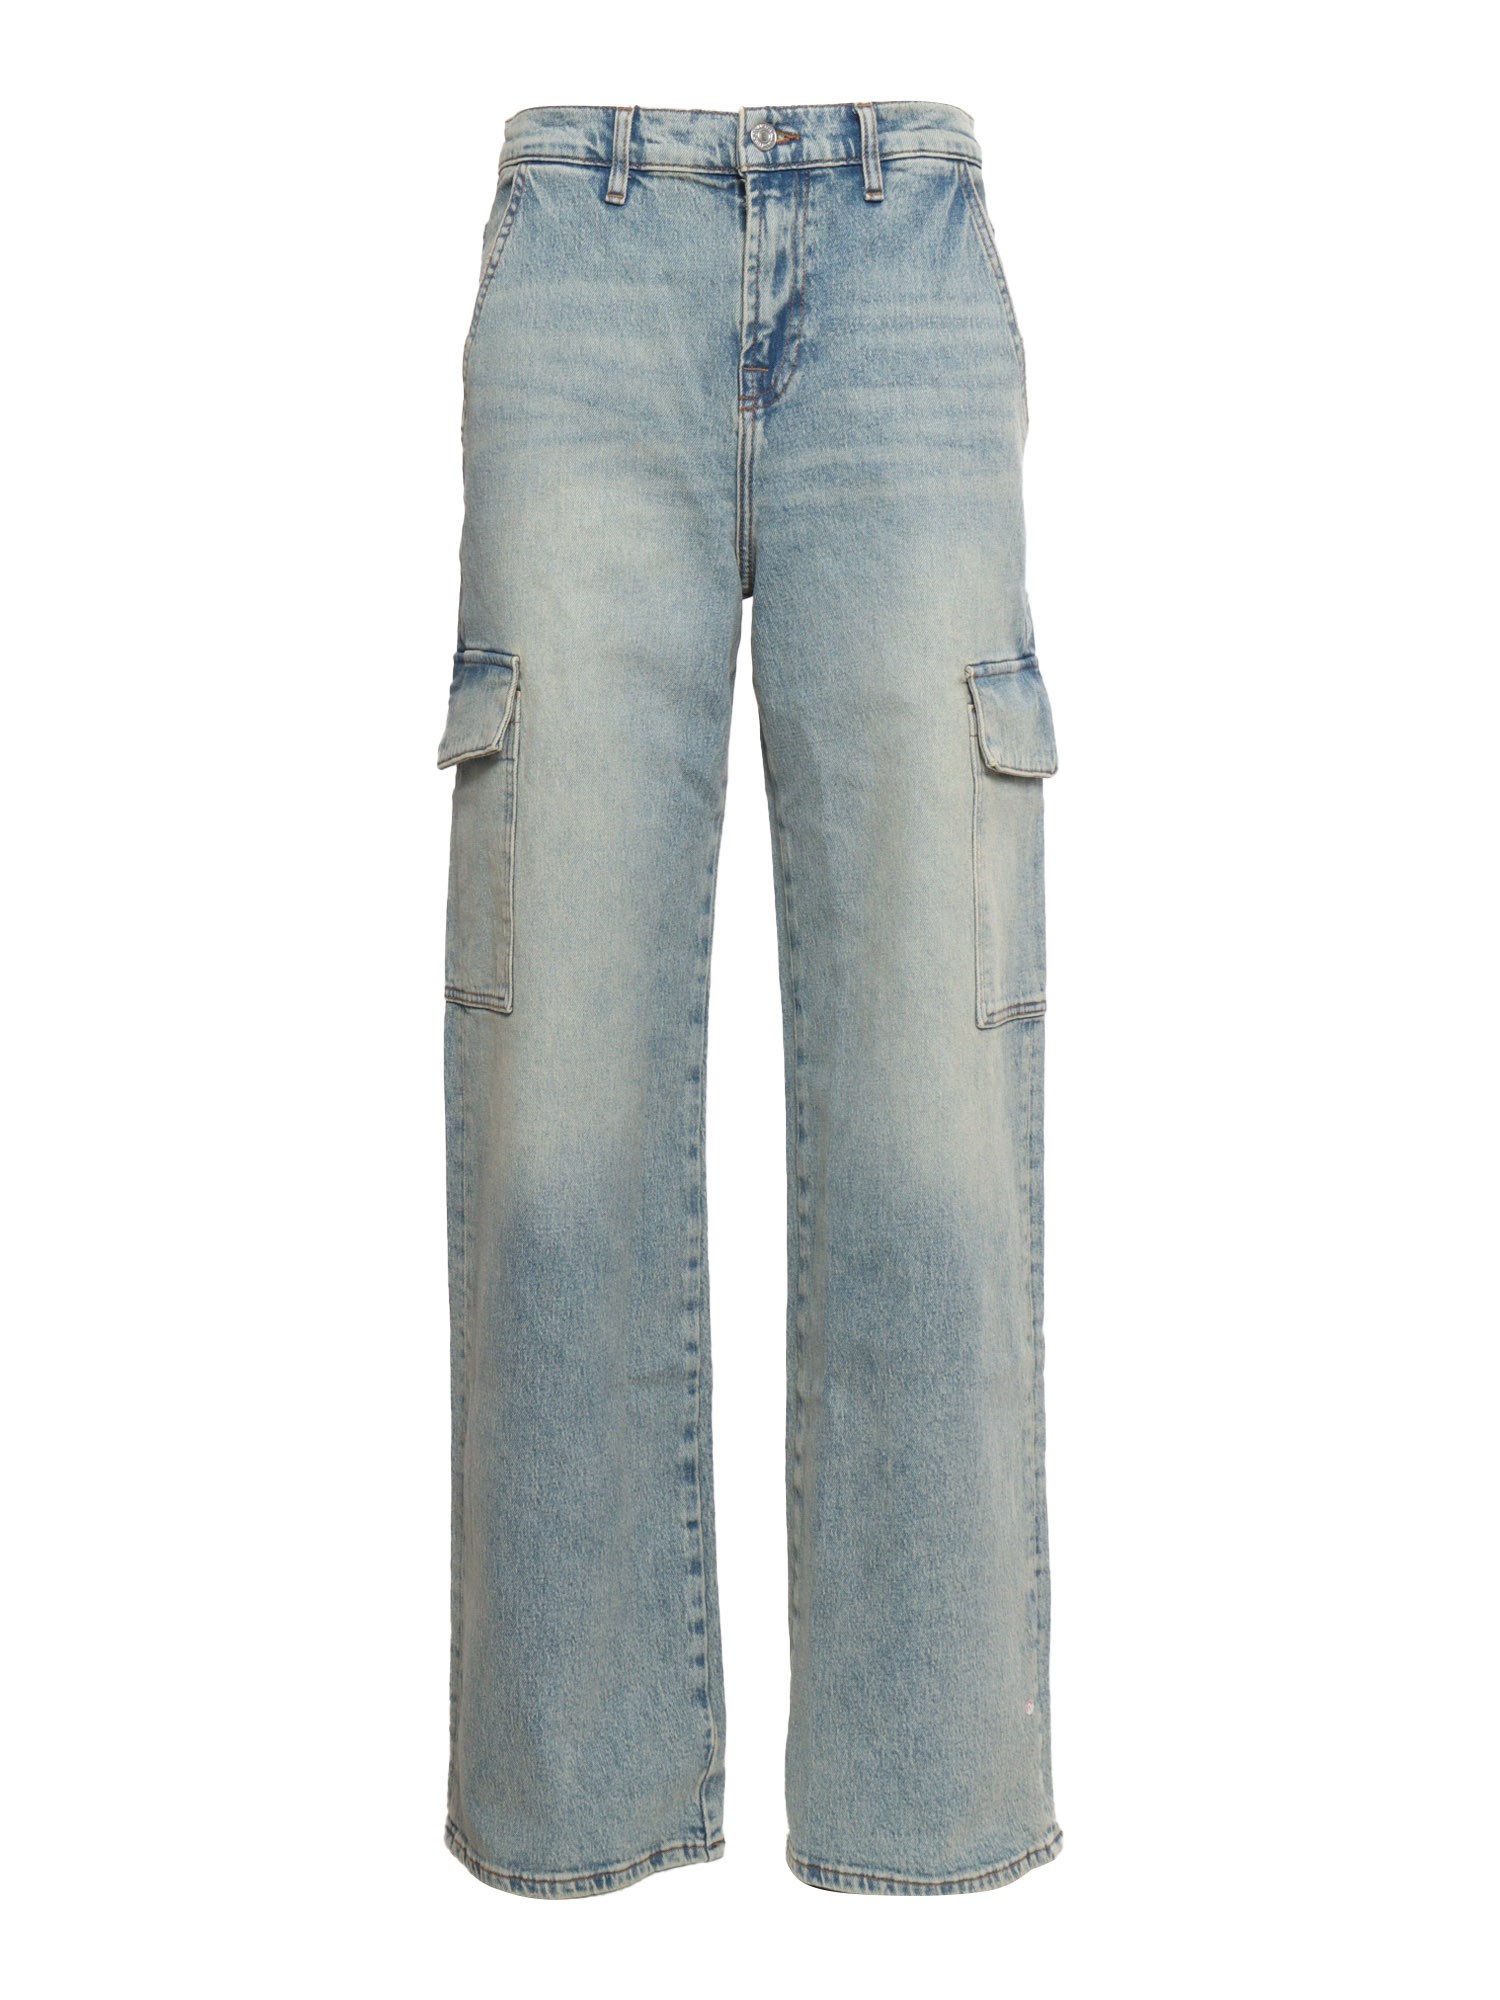 7 For All Mankind Denim Cargo In Blue